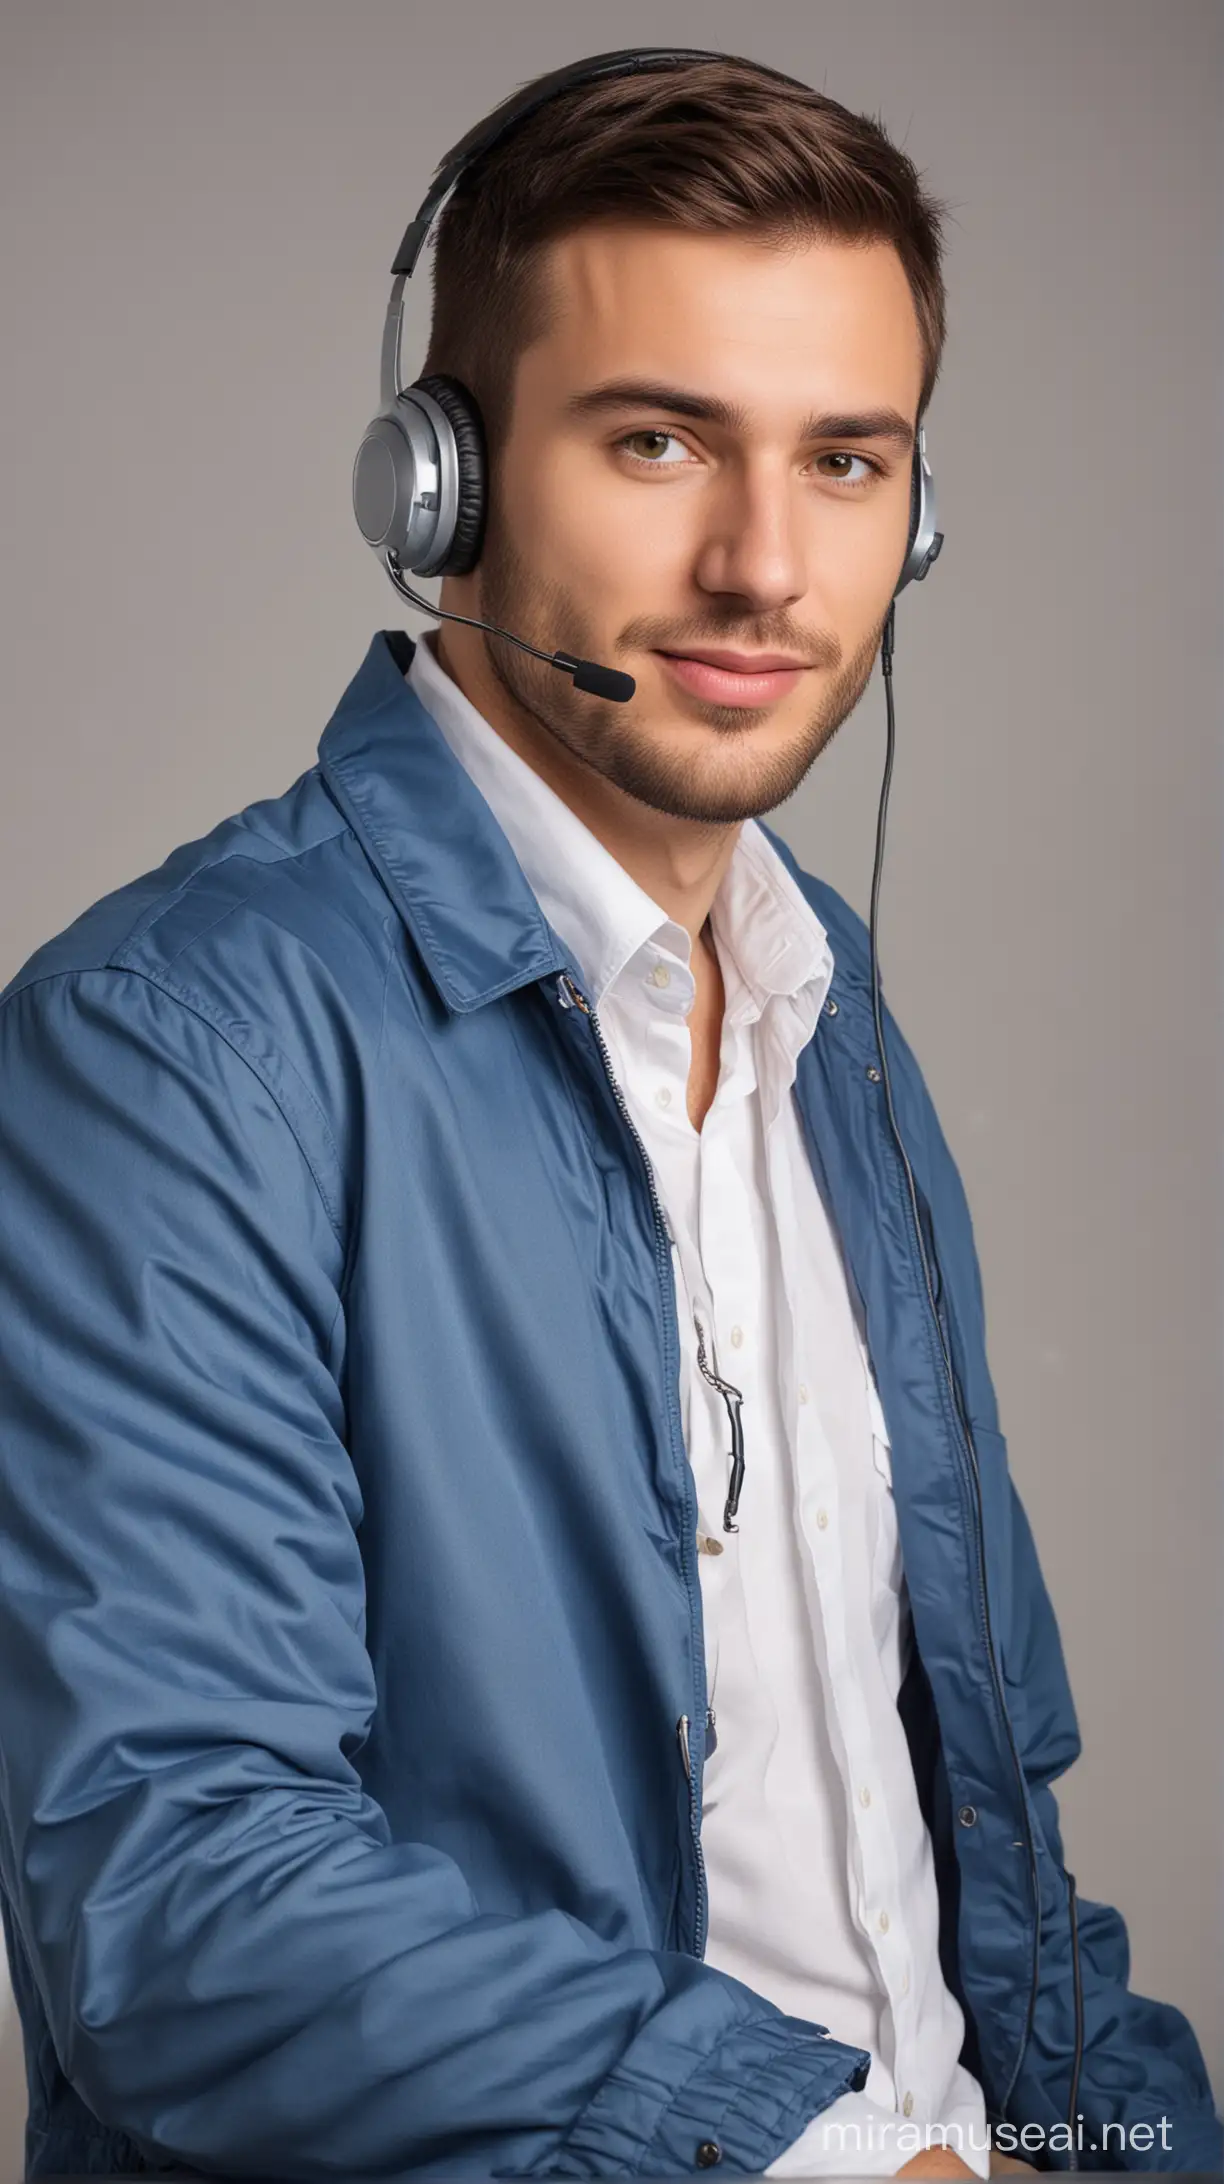 Professional Call Center Operator Wearing Blue Jacket and Headset